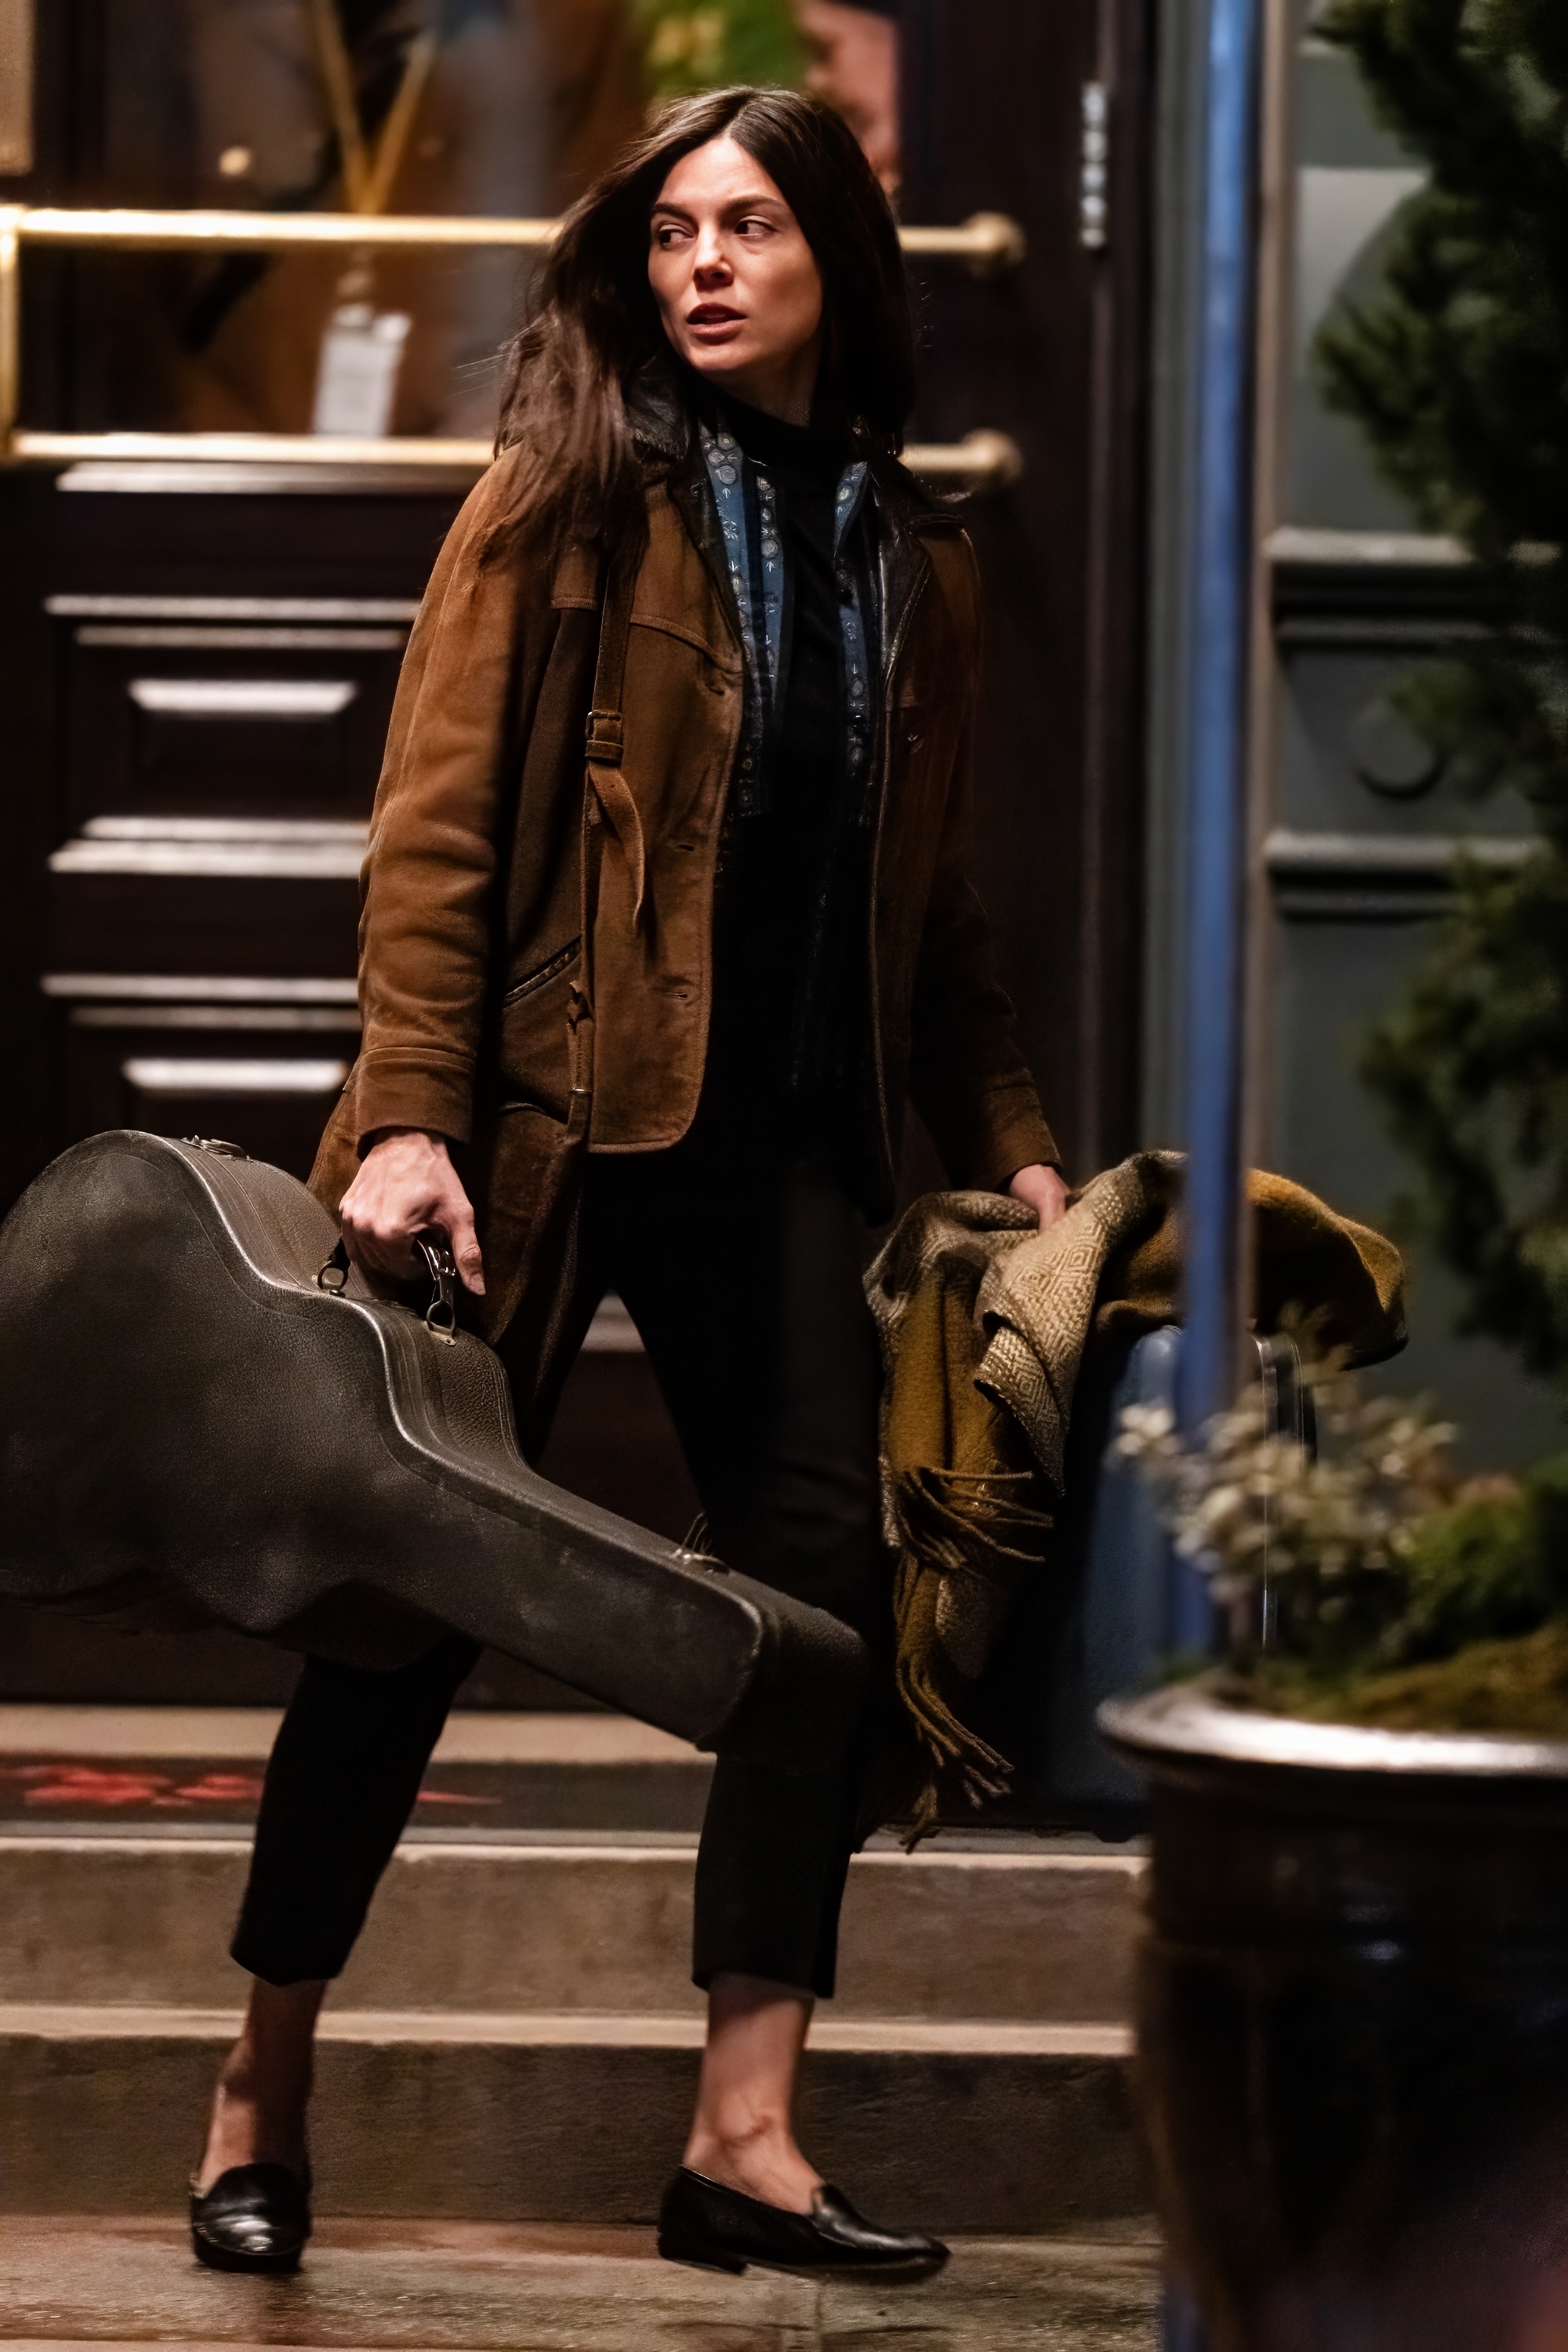 Monica, in a brown jacket, carries a guitar case on stairs